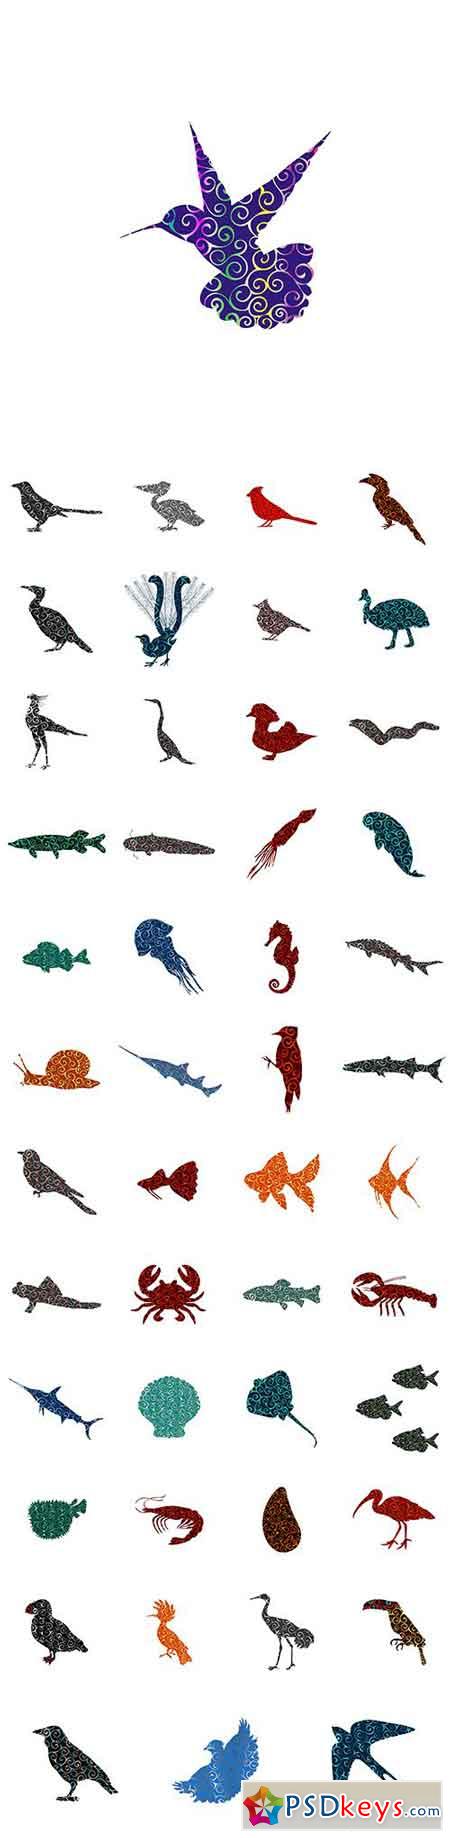 Spiral pattern color silhouette animal 2